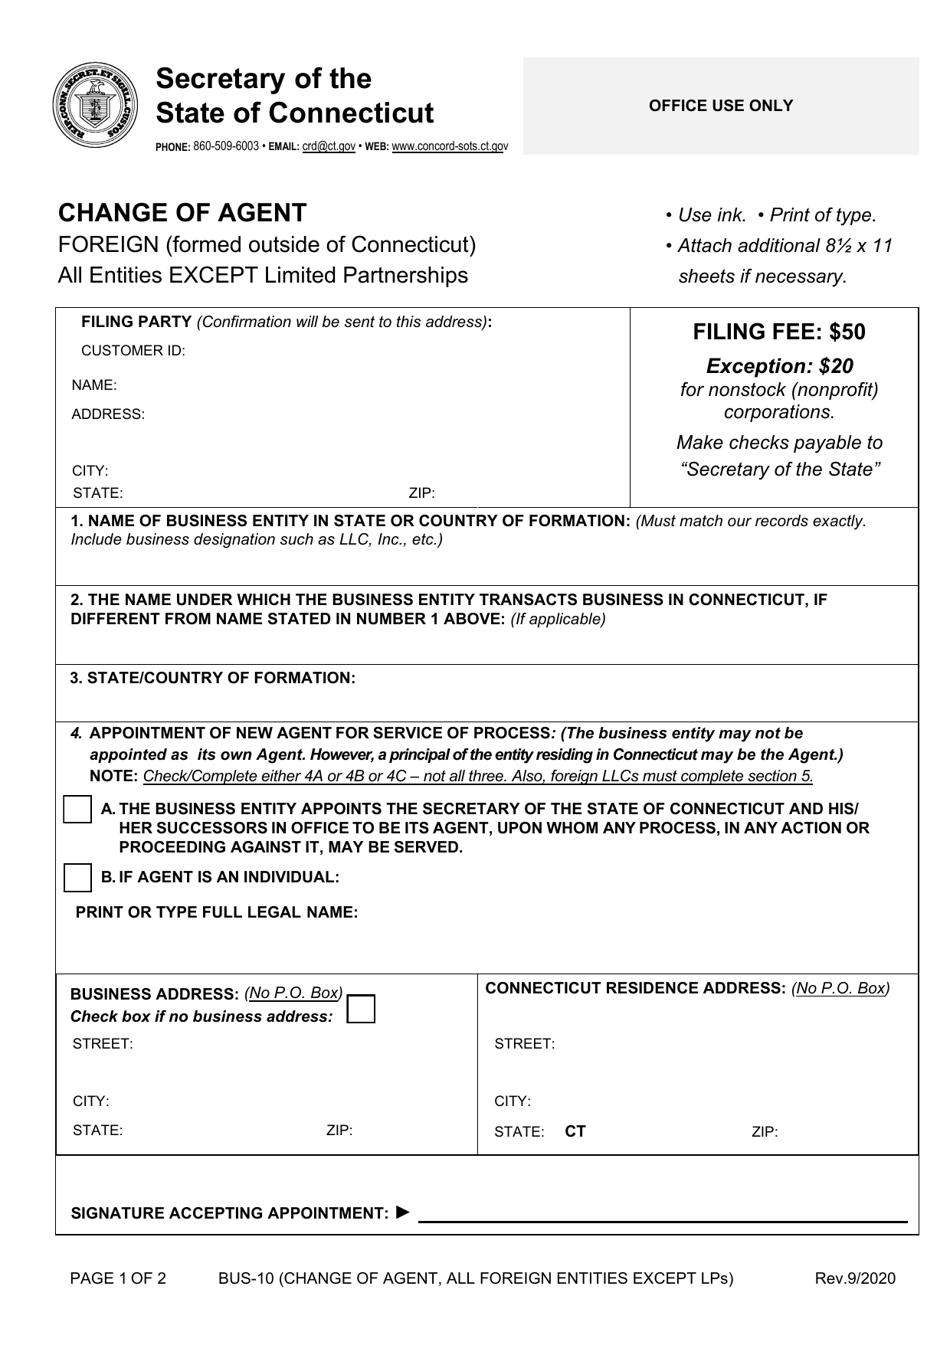 Form BUS-10 Change of Agent - Foreign (Formed Outside of Connecticut) - All Entities Except Limited Partnerships - Connecticut, Page 1